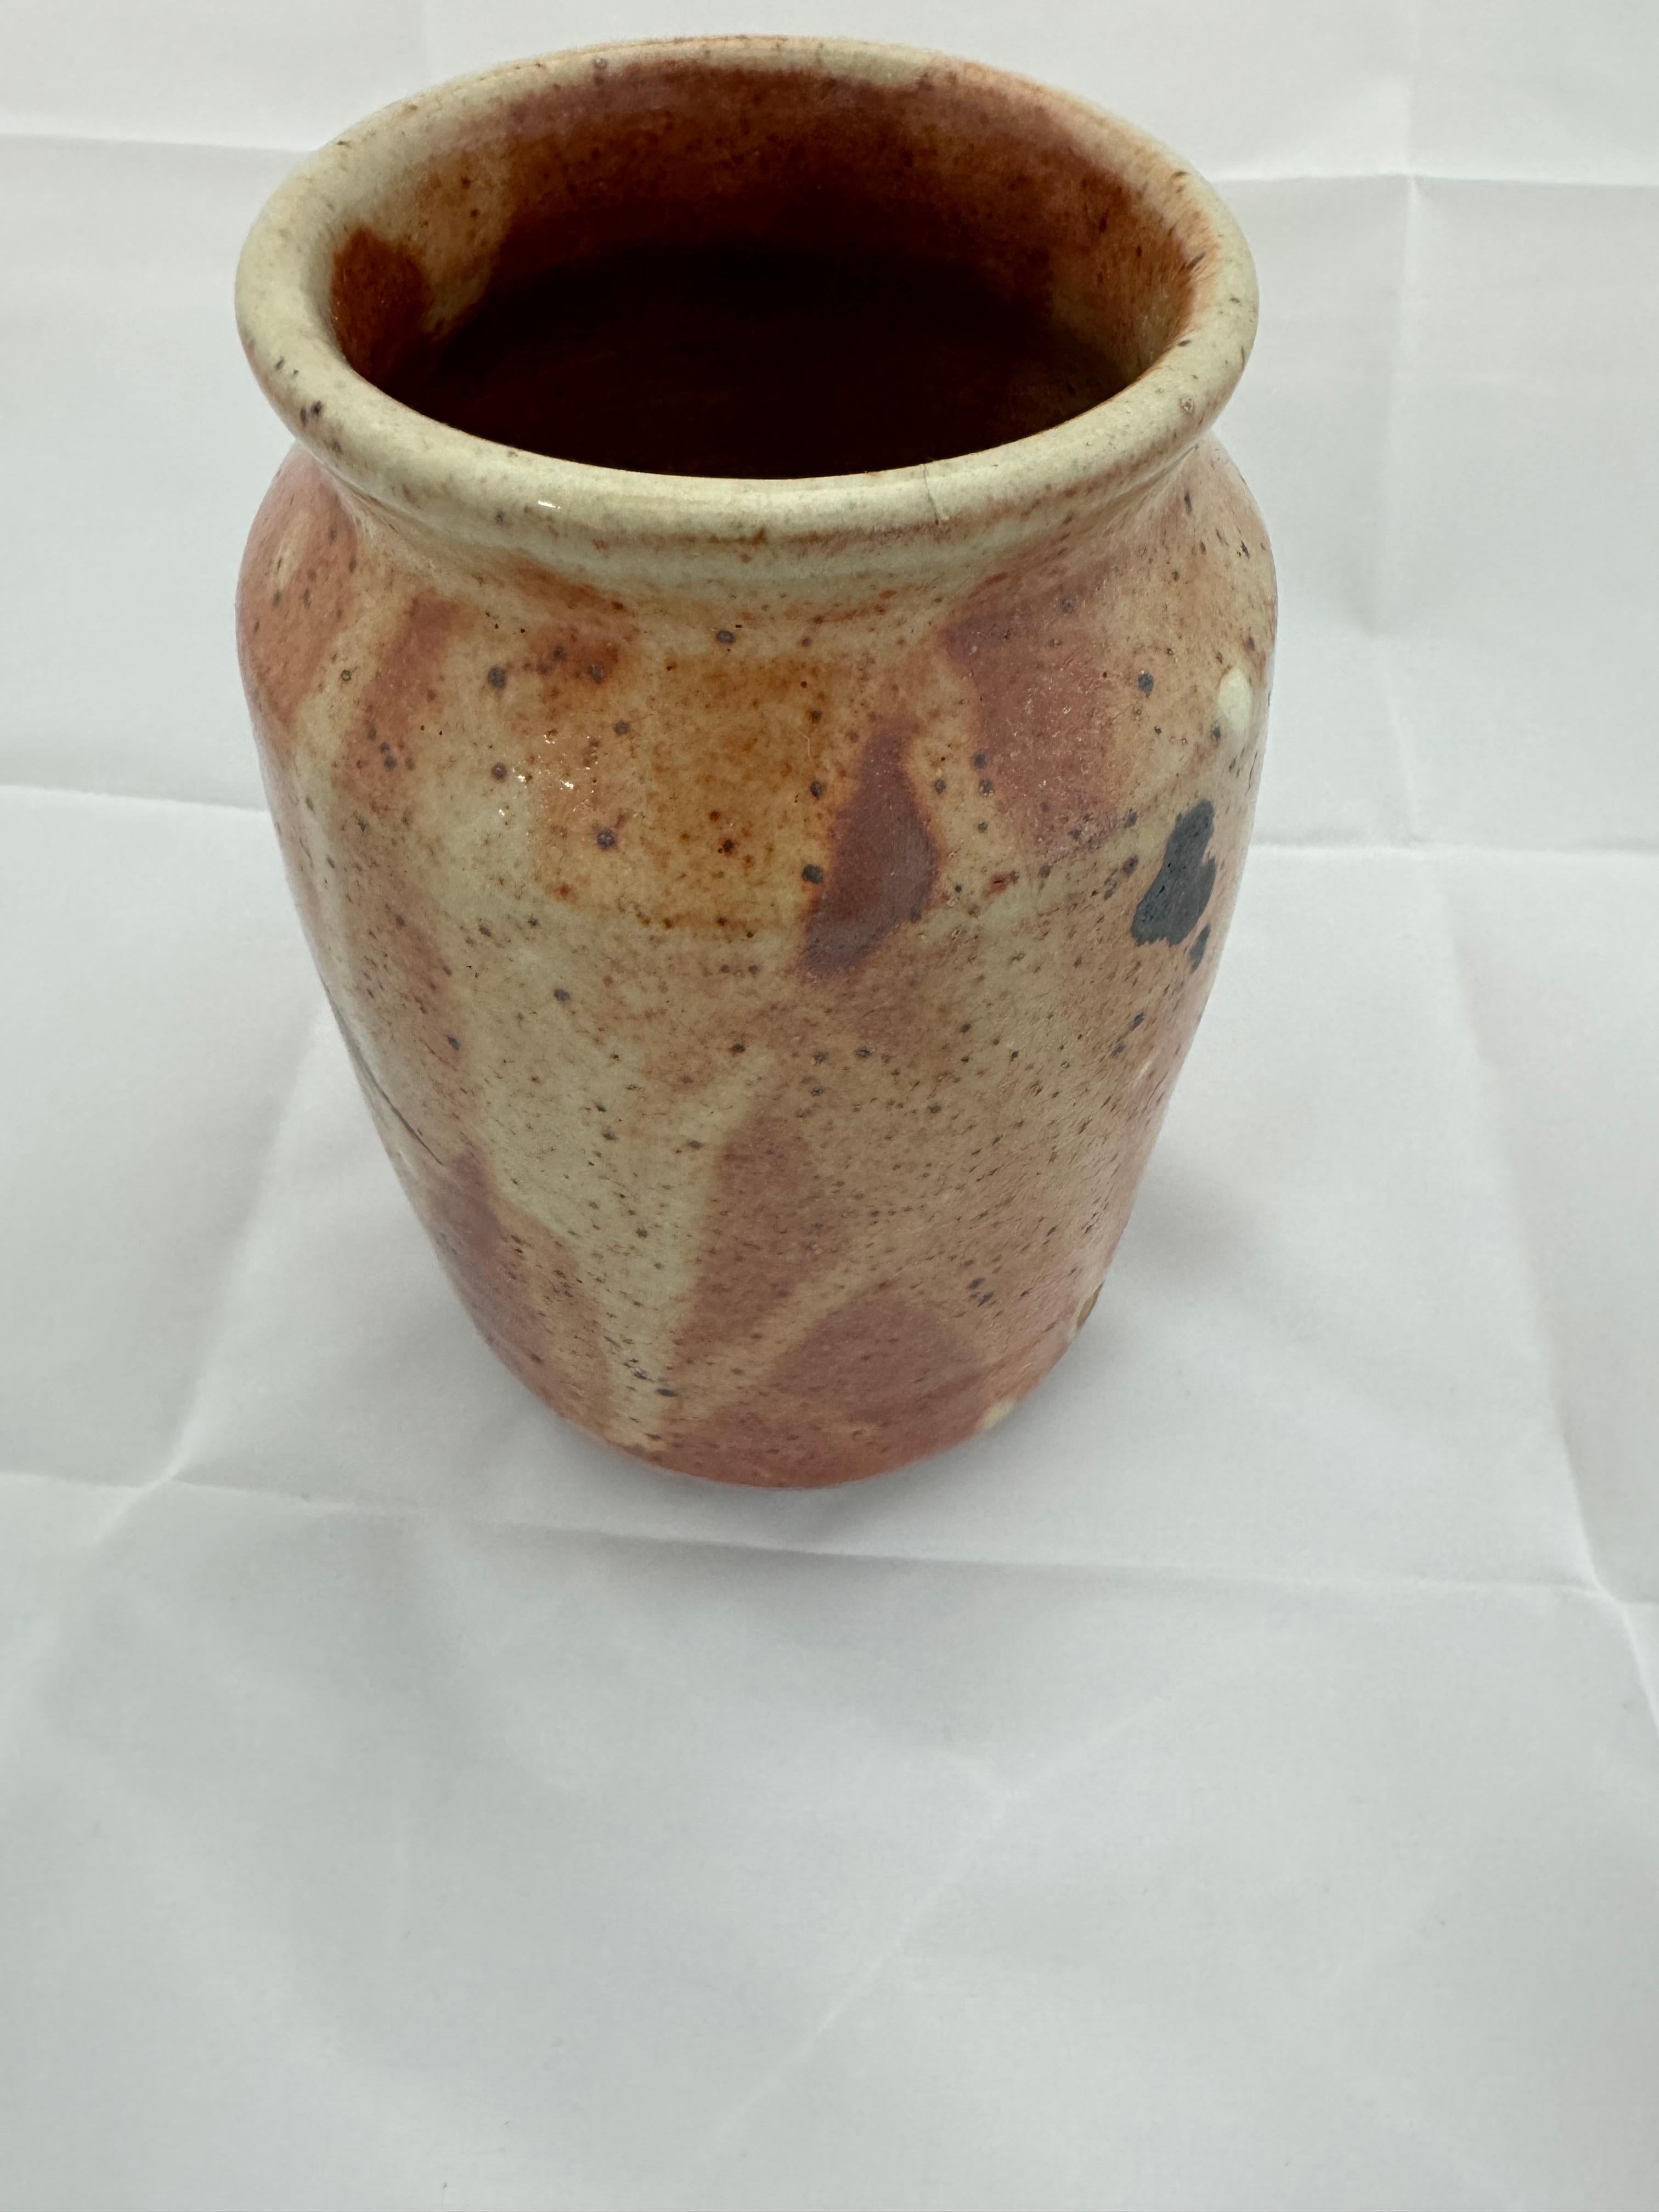 Nice pottery vessel for your collection